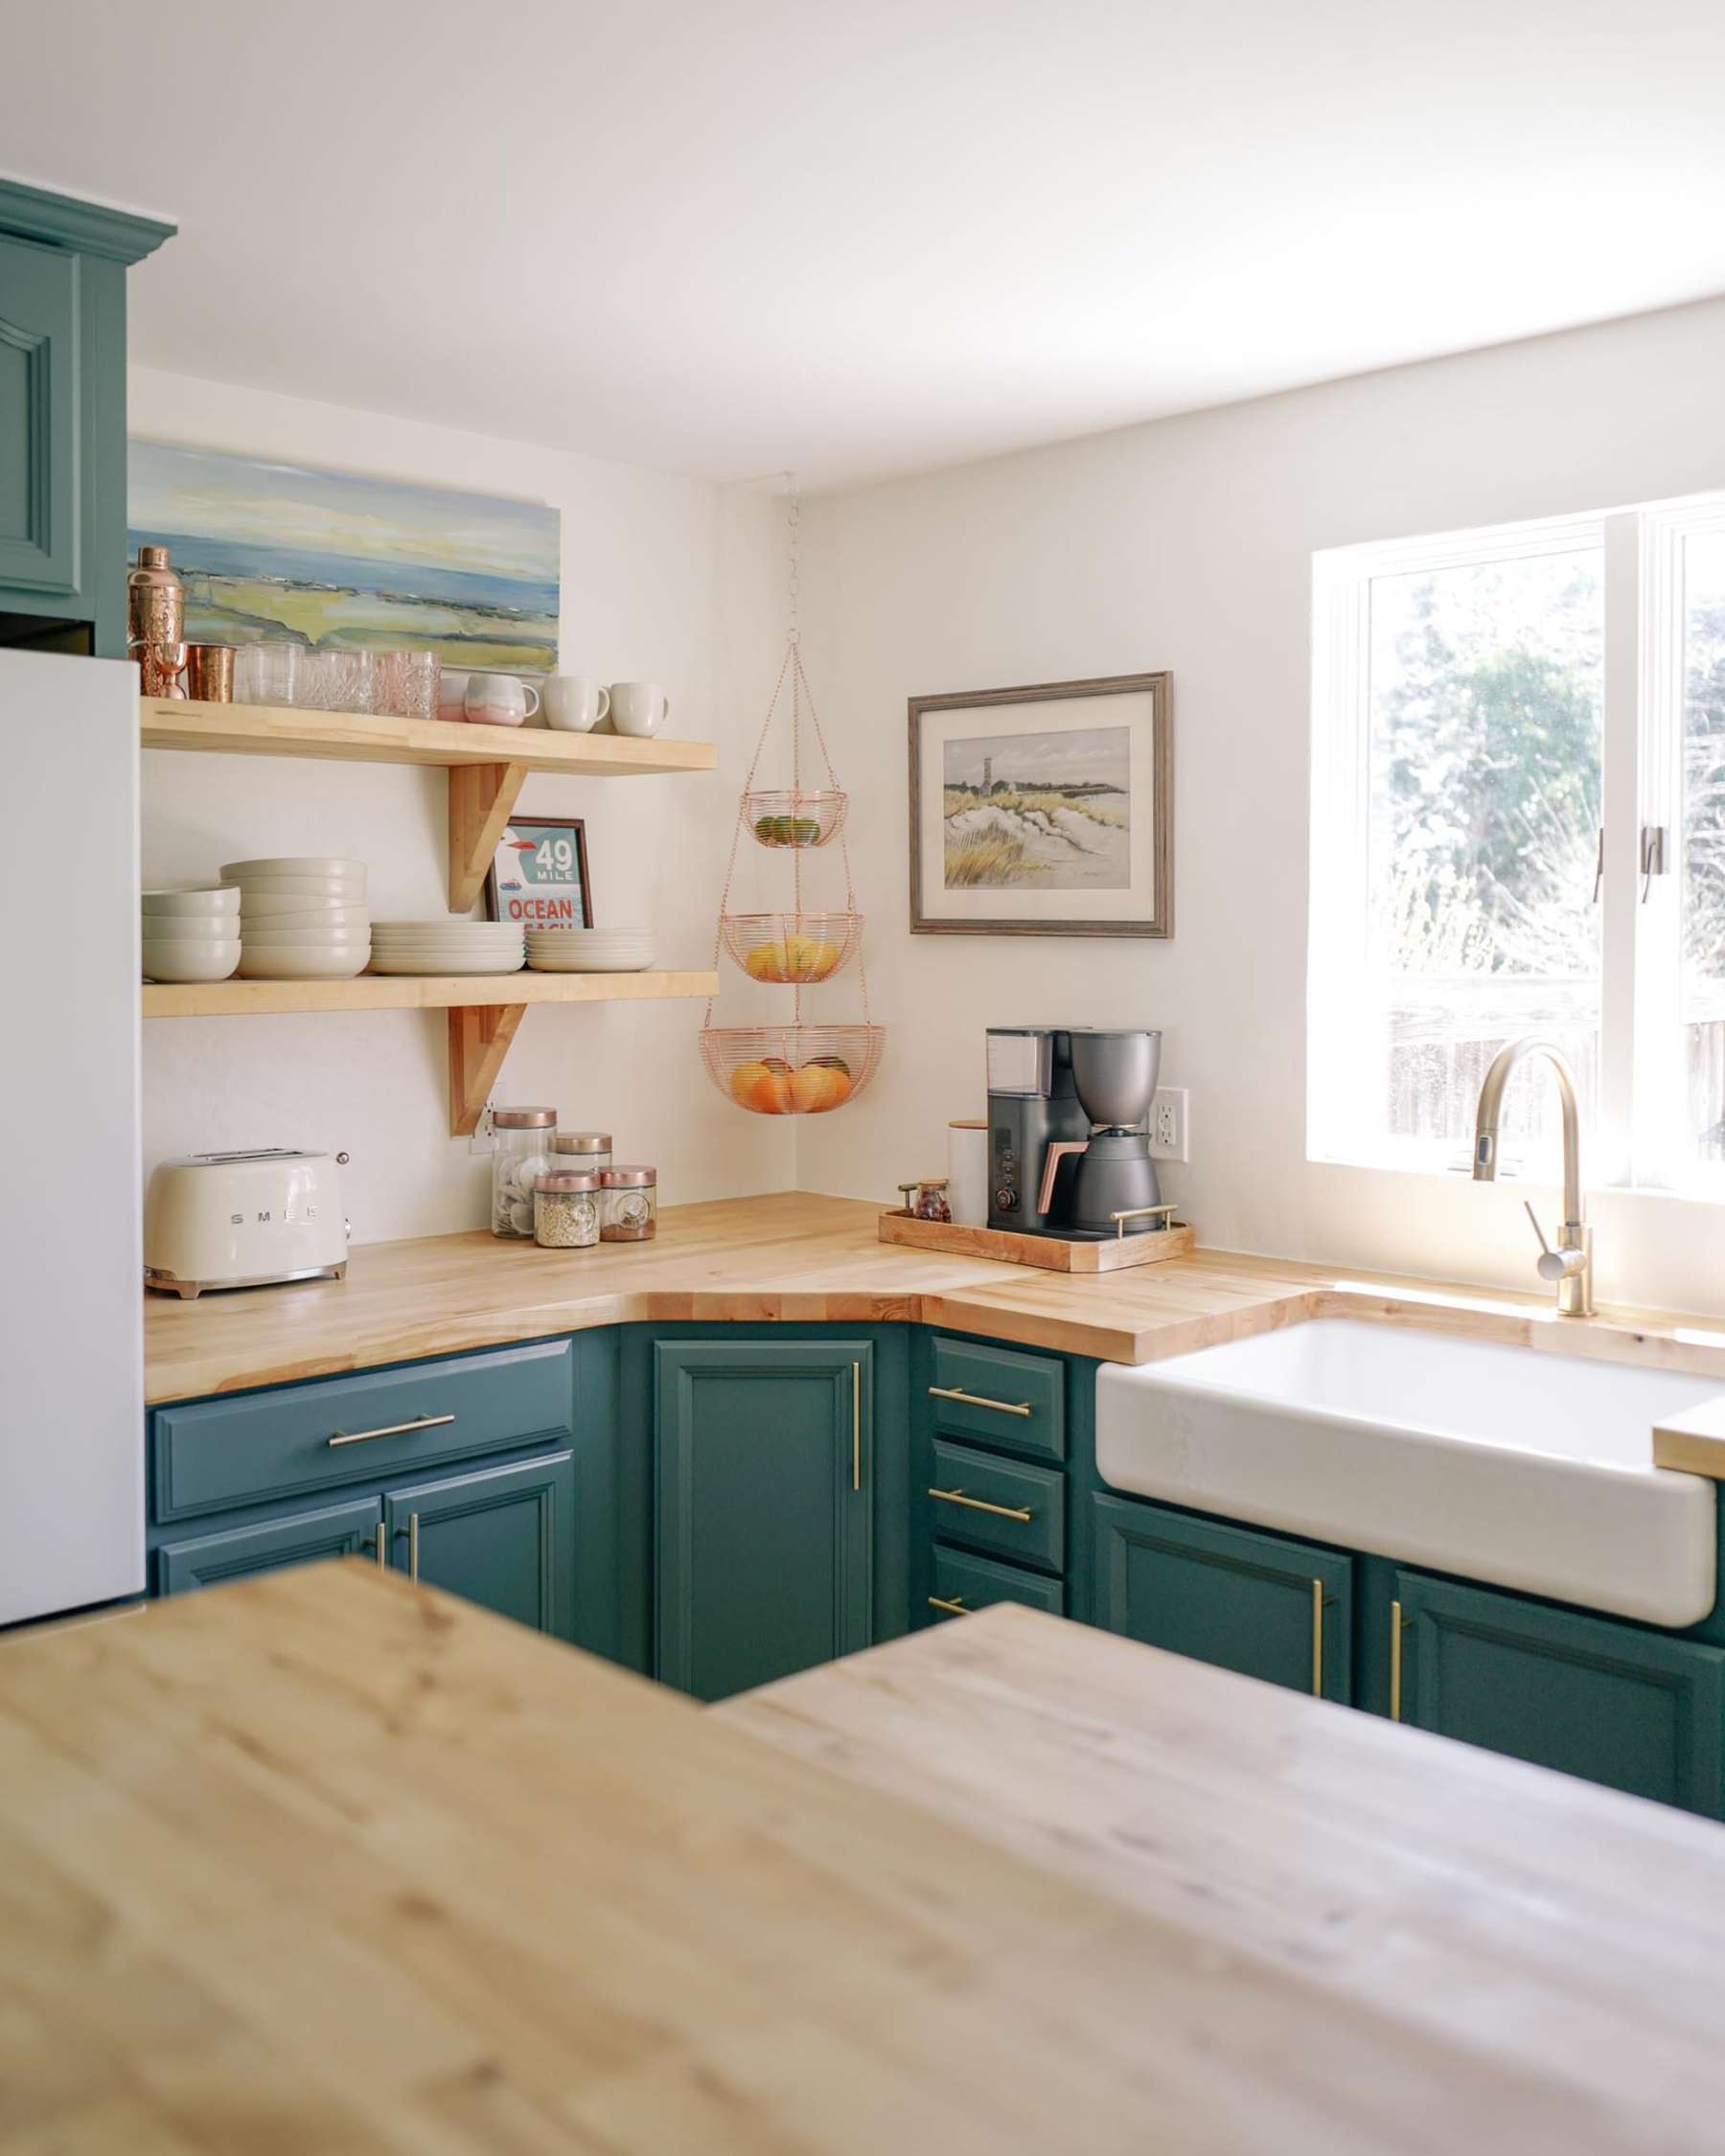 How a Couple Installed Butcher Block Counters on Their Own  The